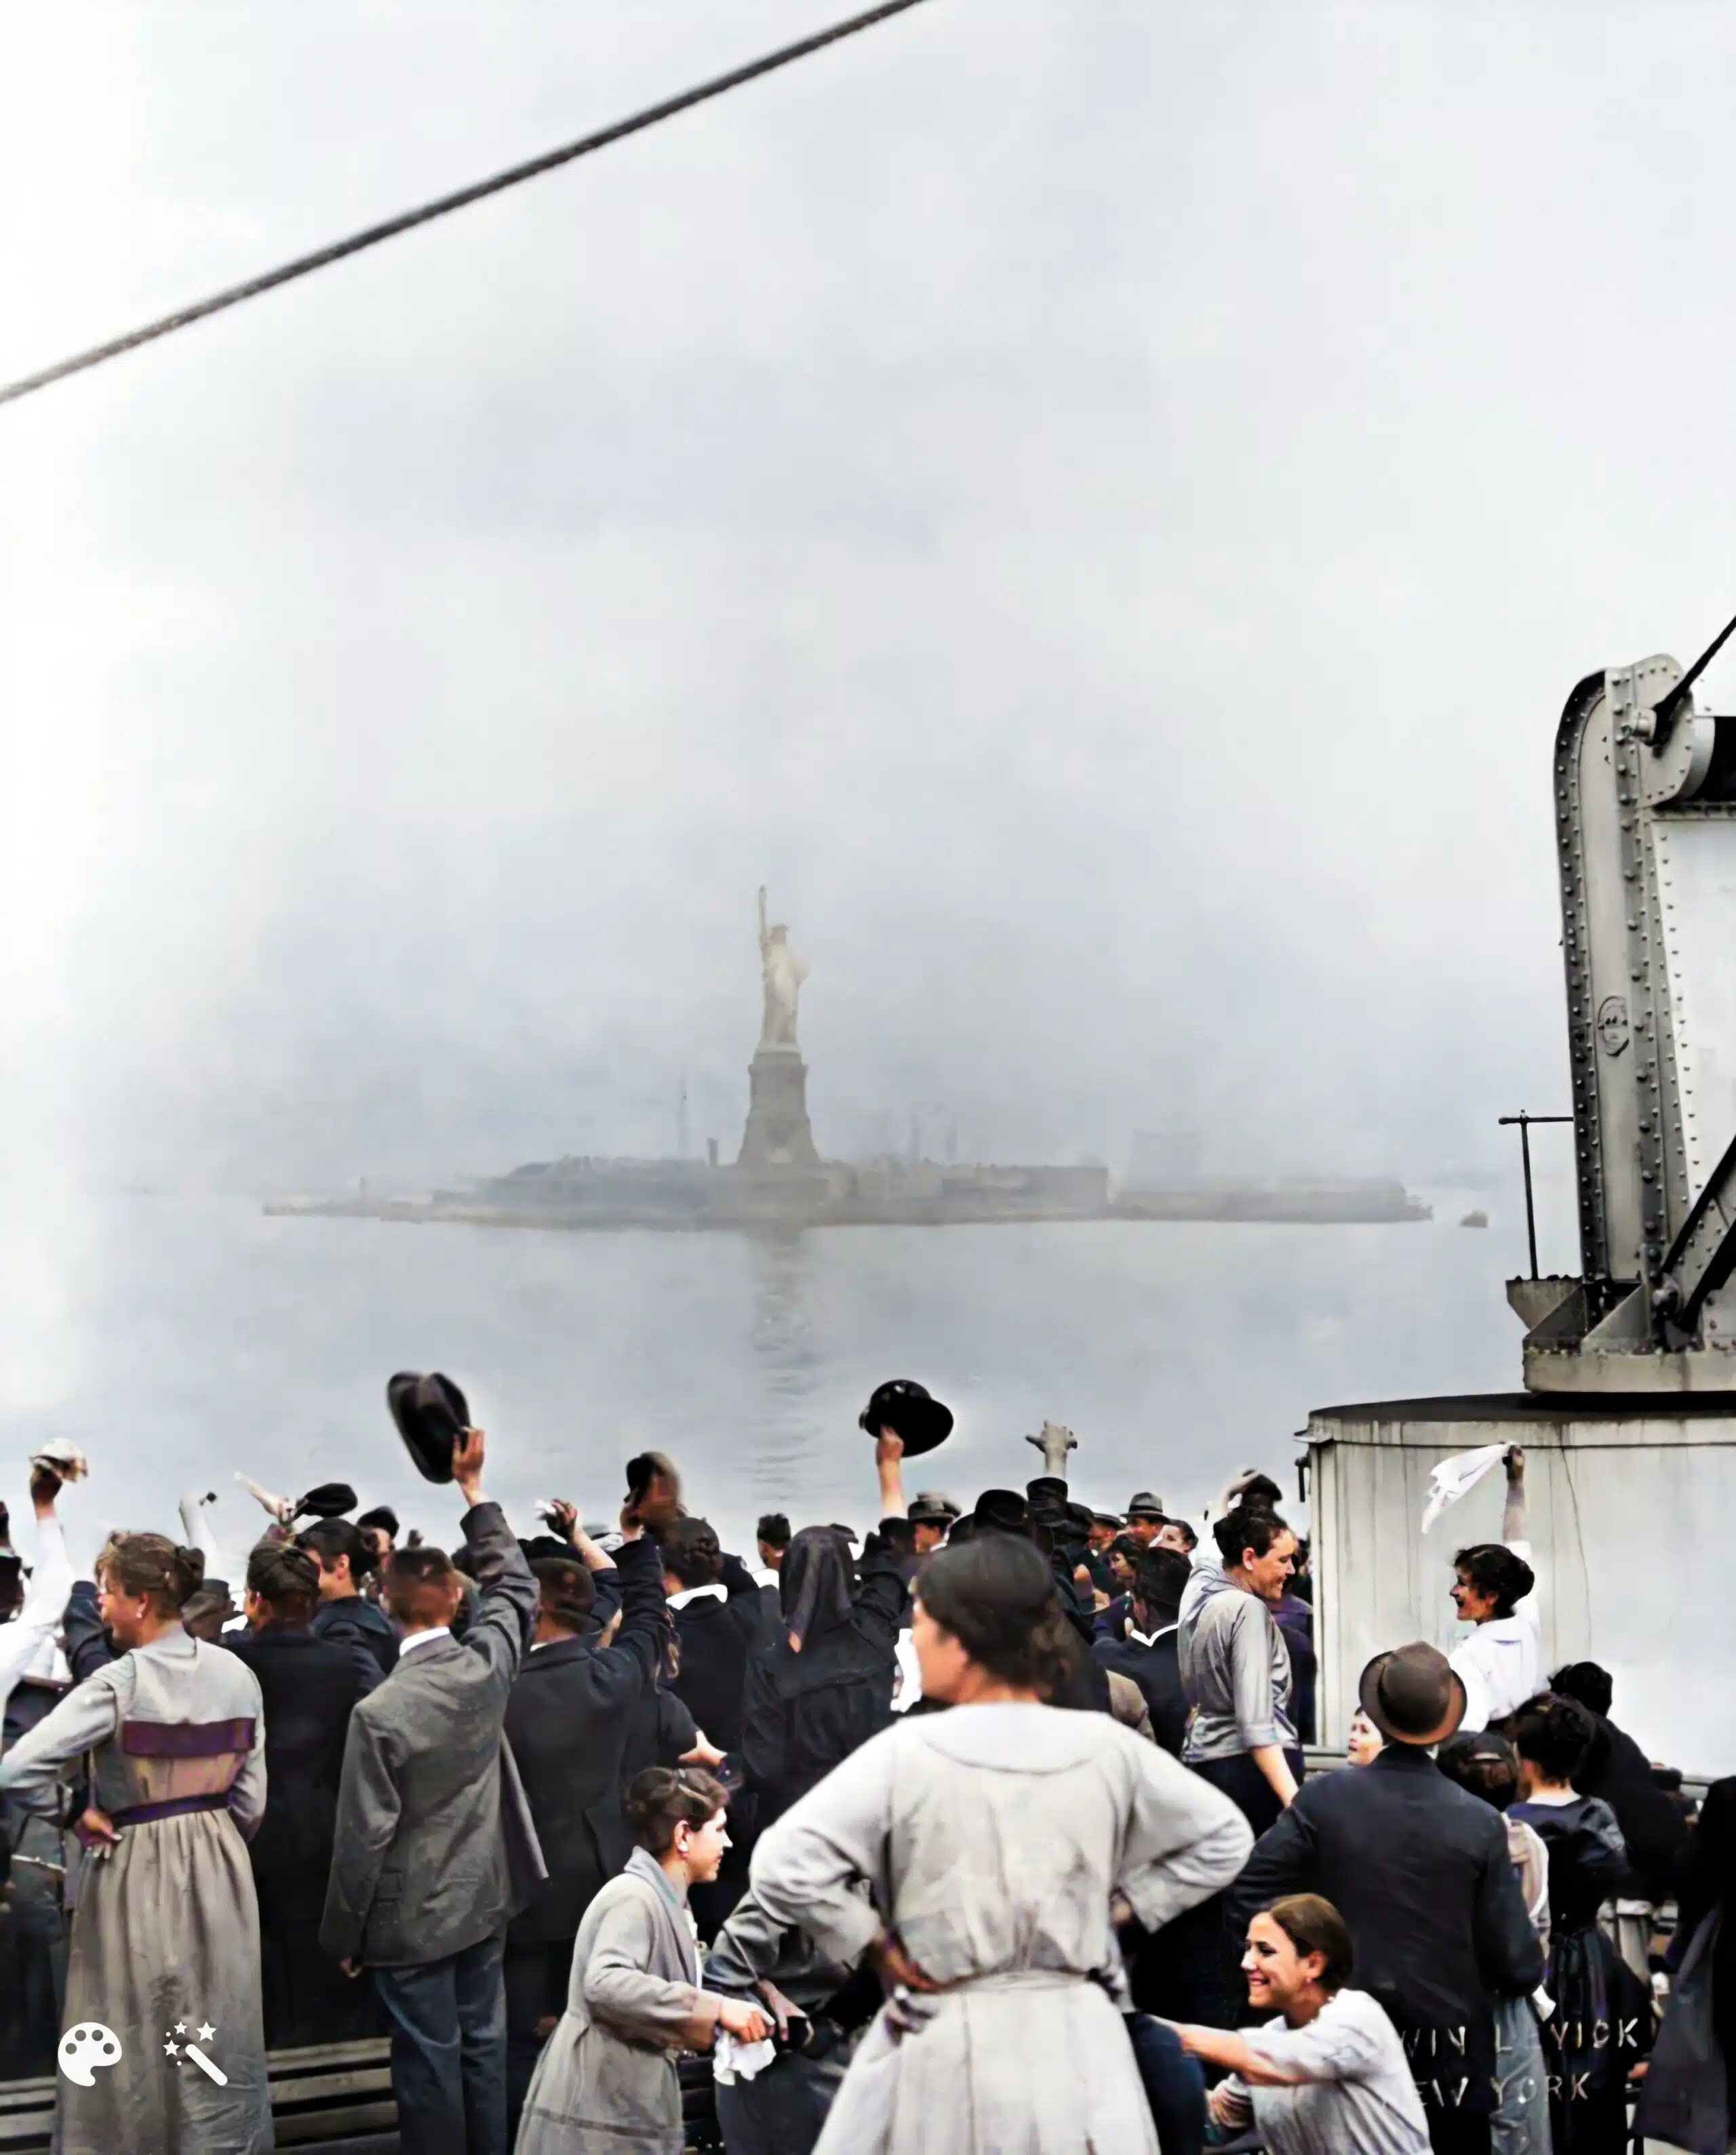 Passengers rejoice upon arrival in New York Harbor, c. 1900. Photo colorized and enhanced by MyHeritage